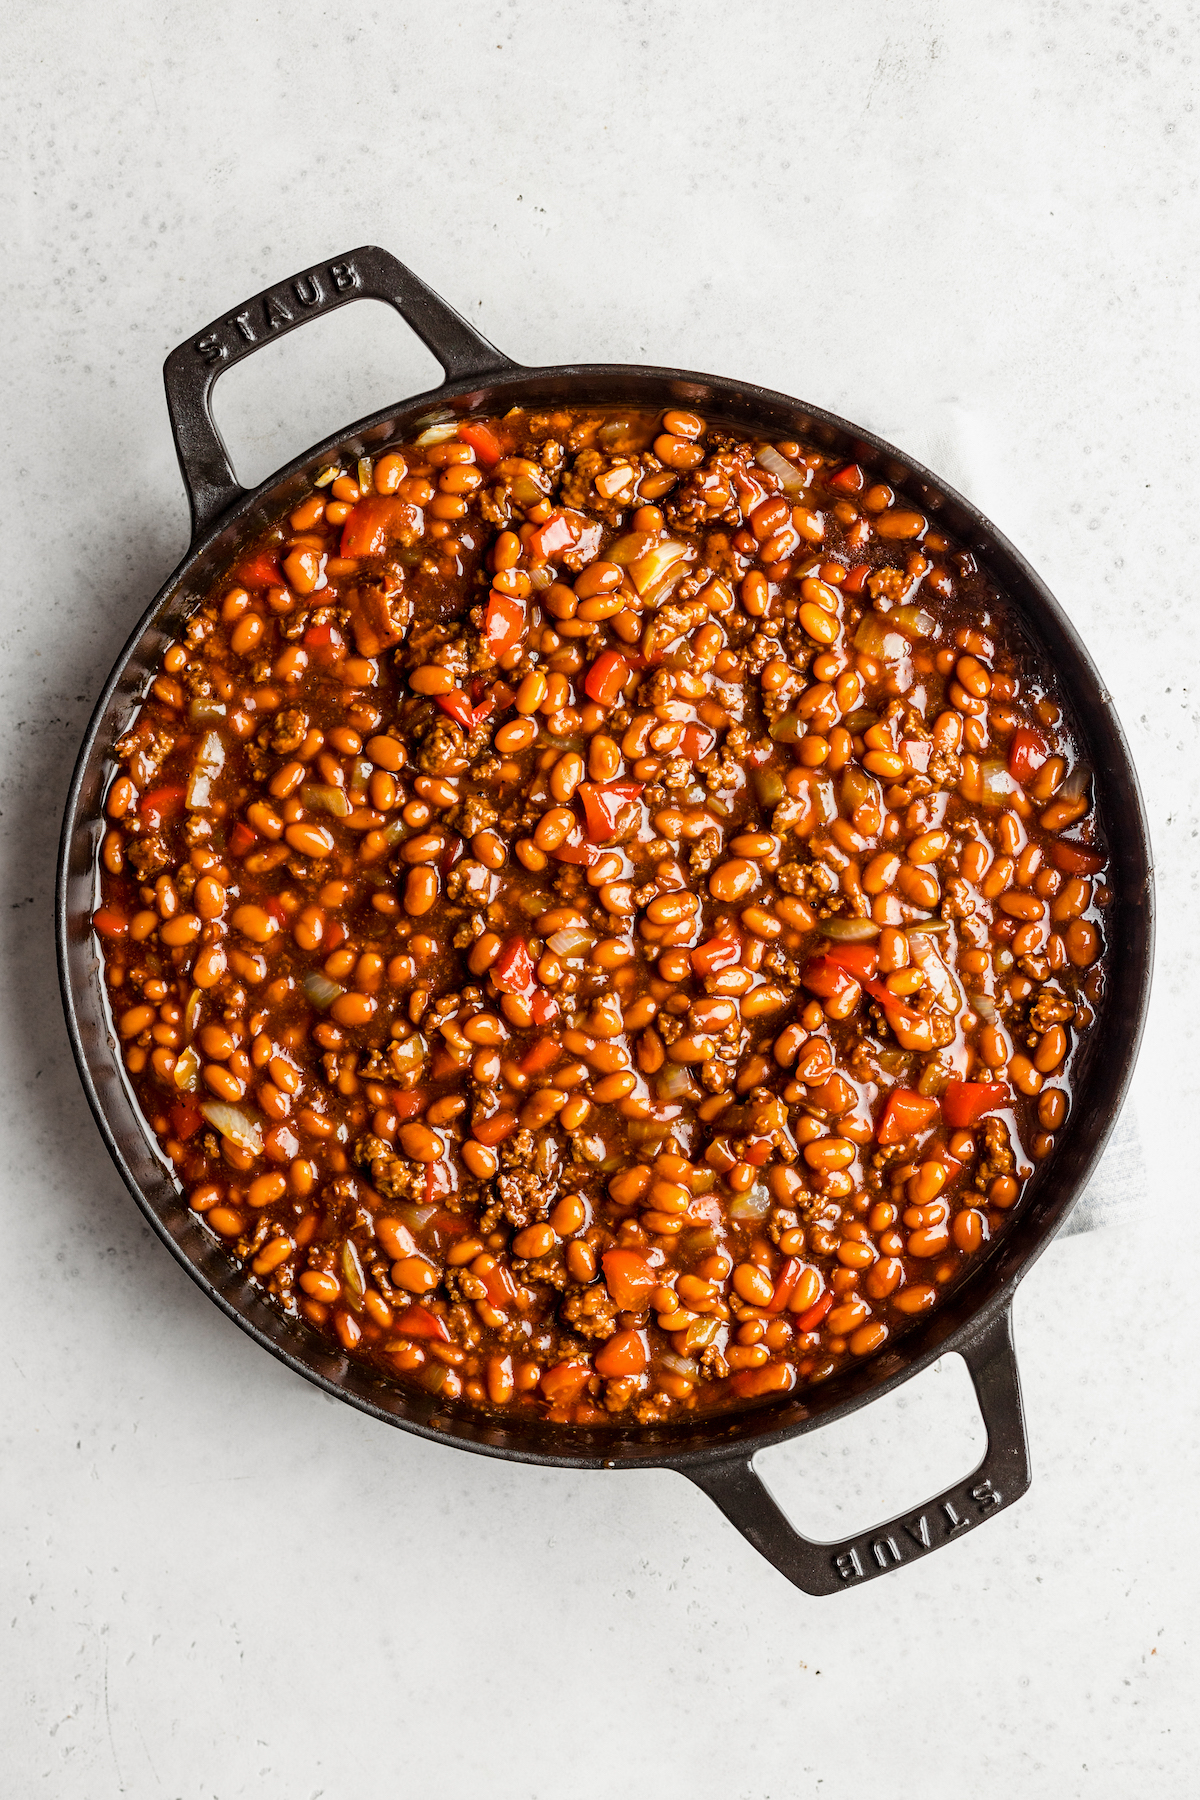 A skillet full of beans and ground beef.